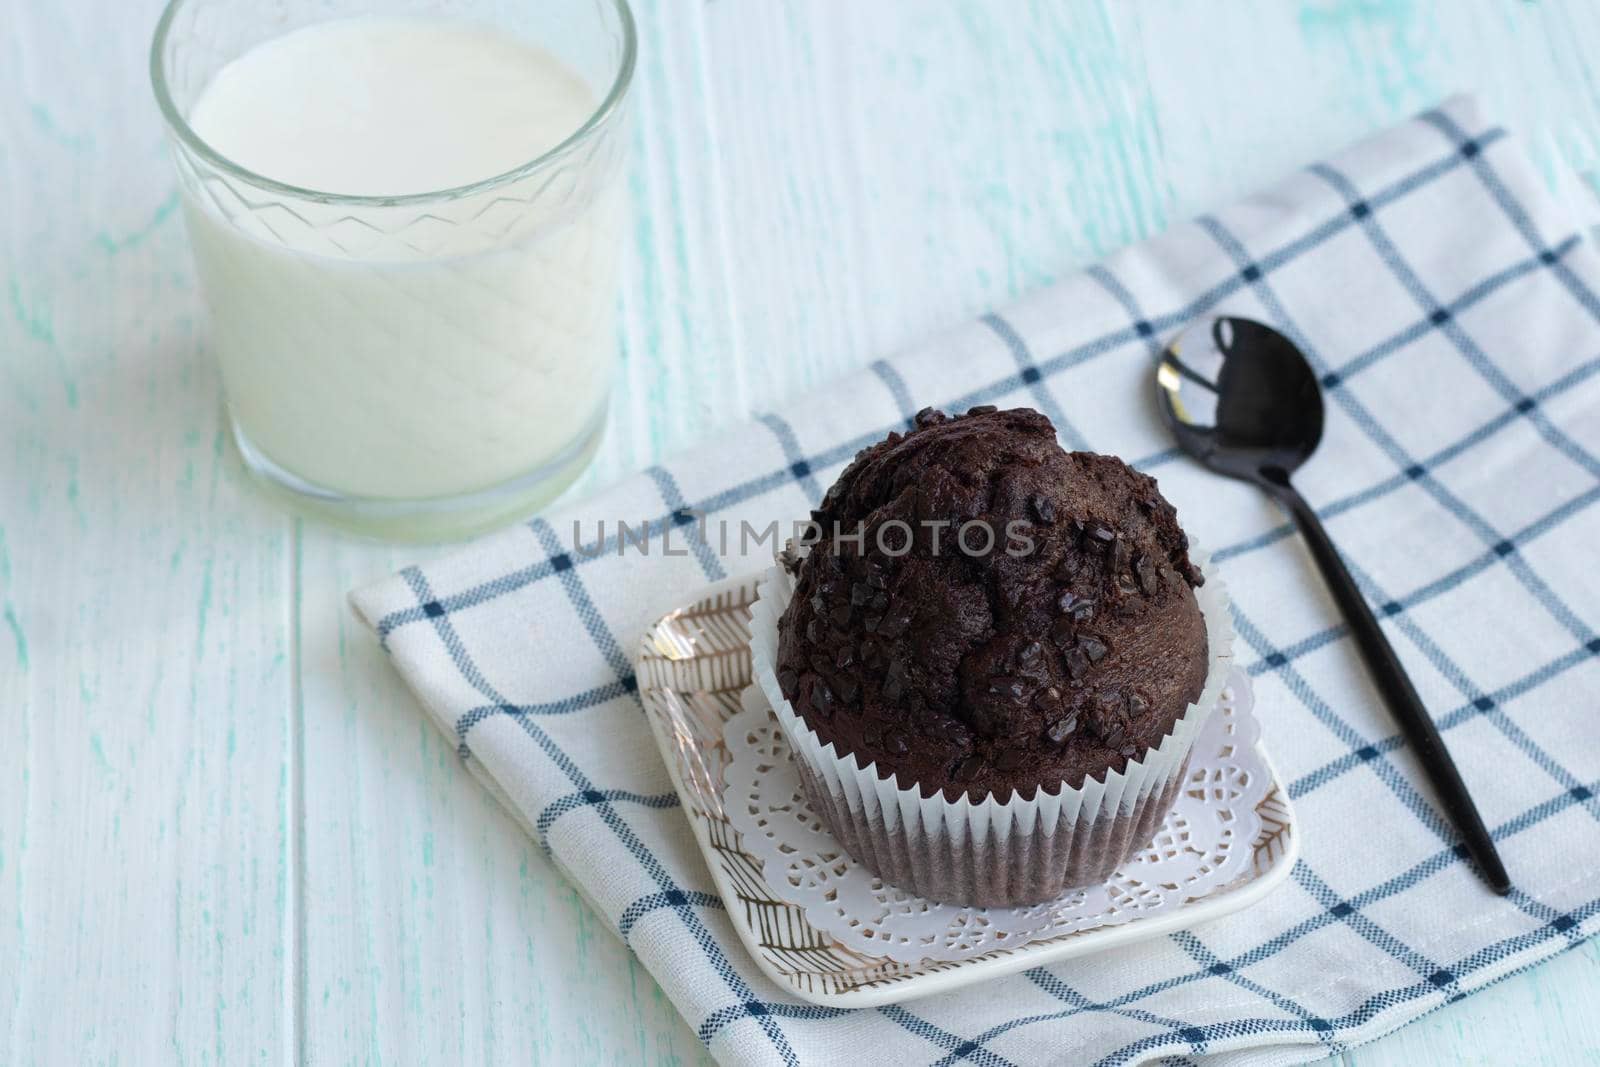 cupcake with chocolate chips stands on a napkin on a light wooden background. chocolate muffin with a glass of milk and a spoon. A beautiful breakfast with homemade pastries